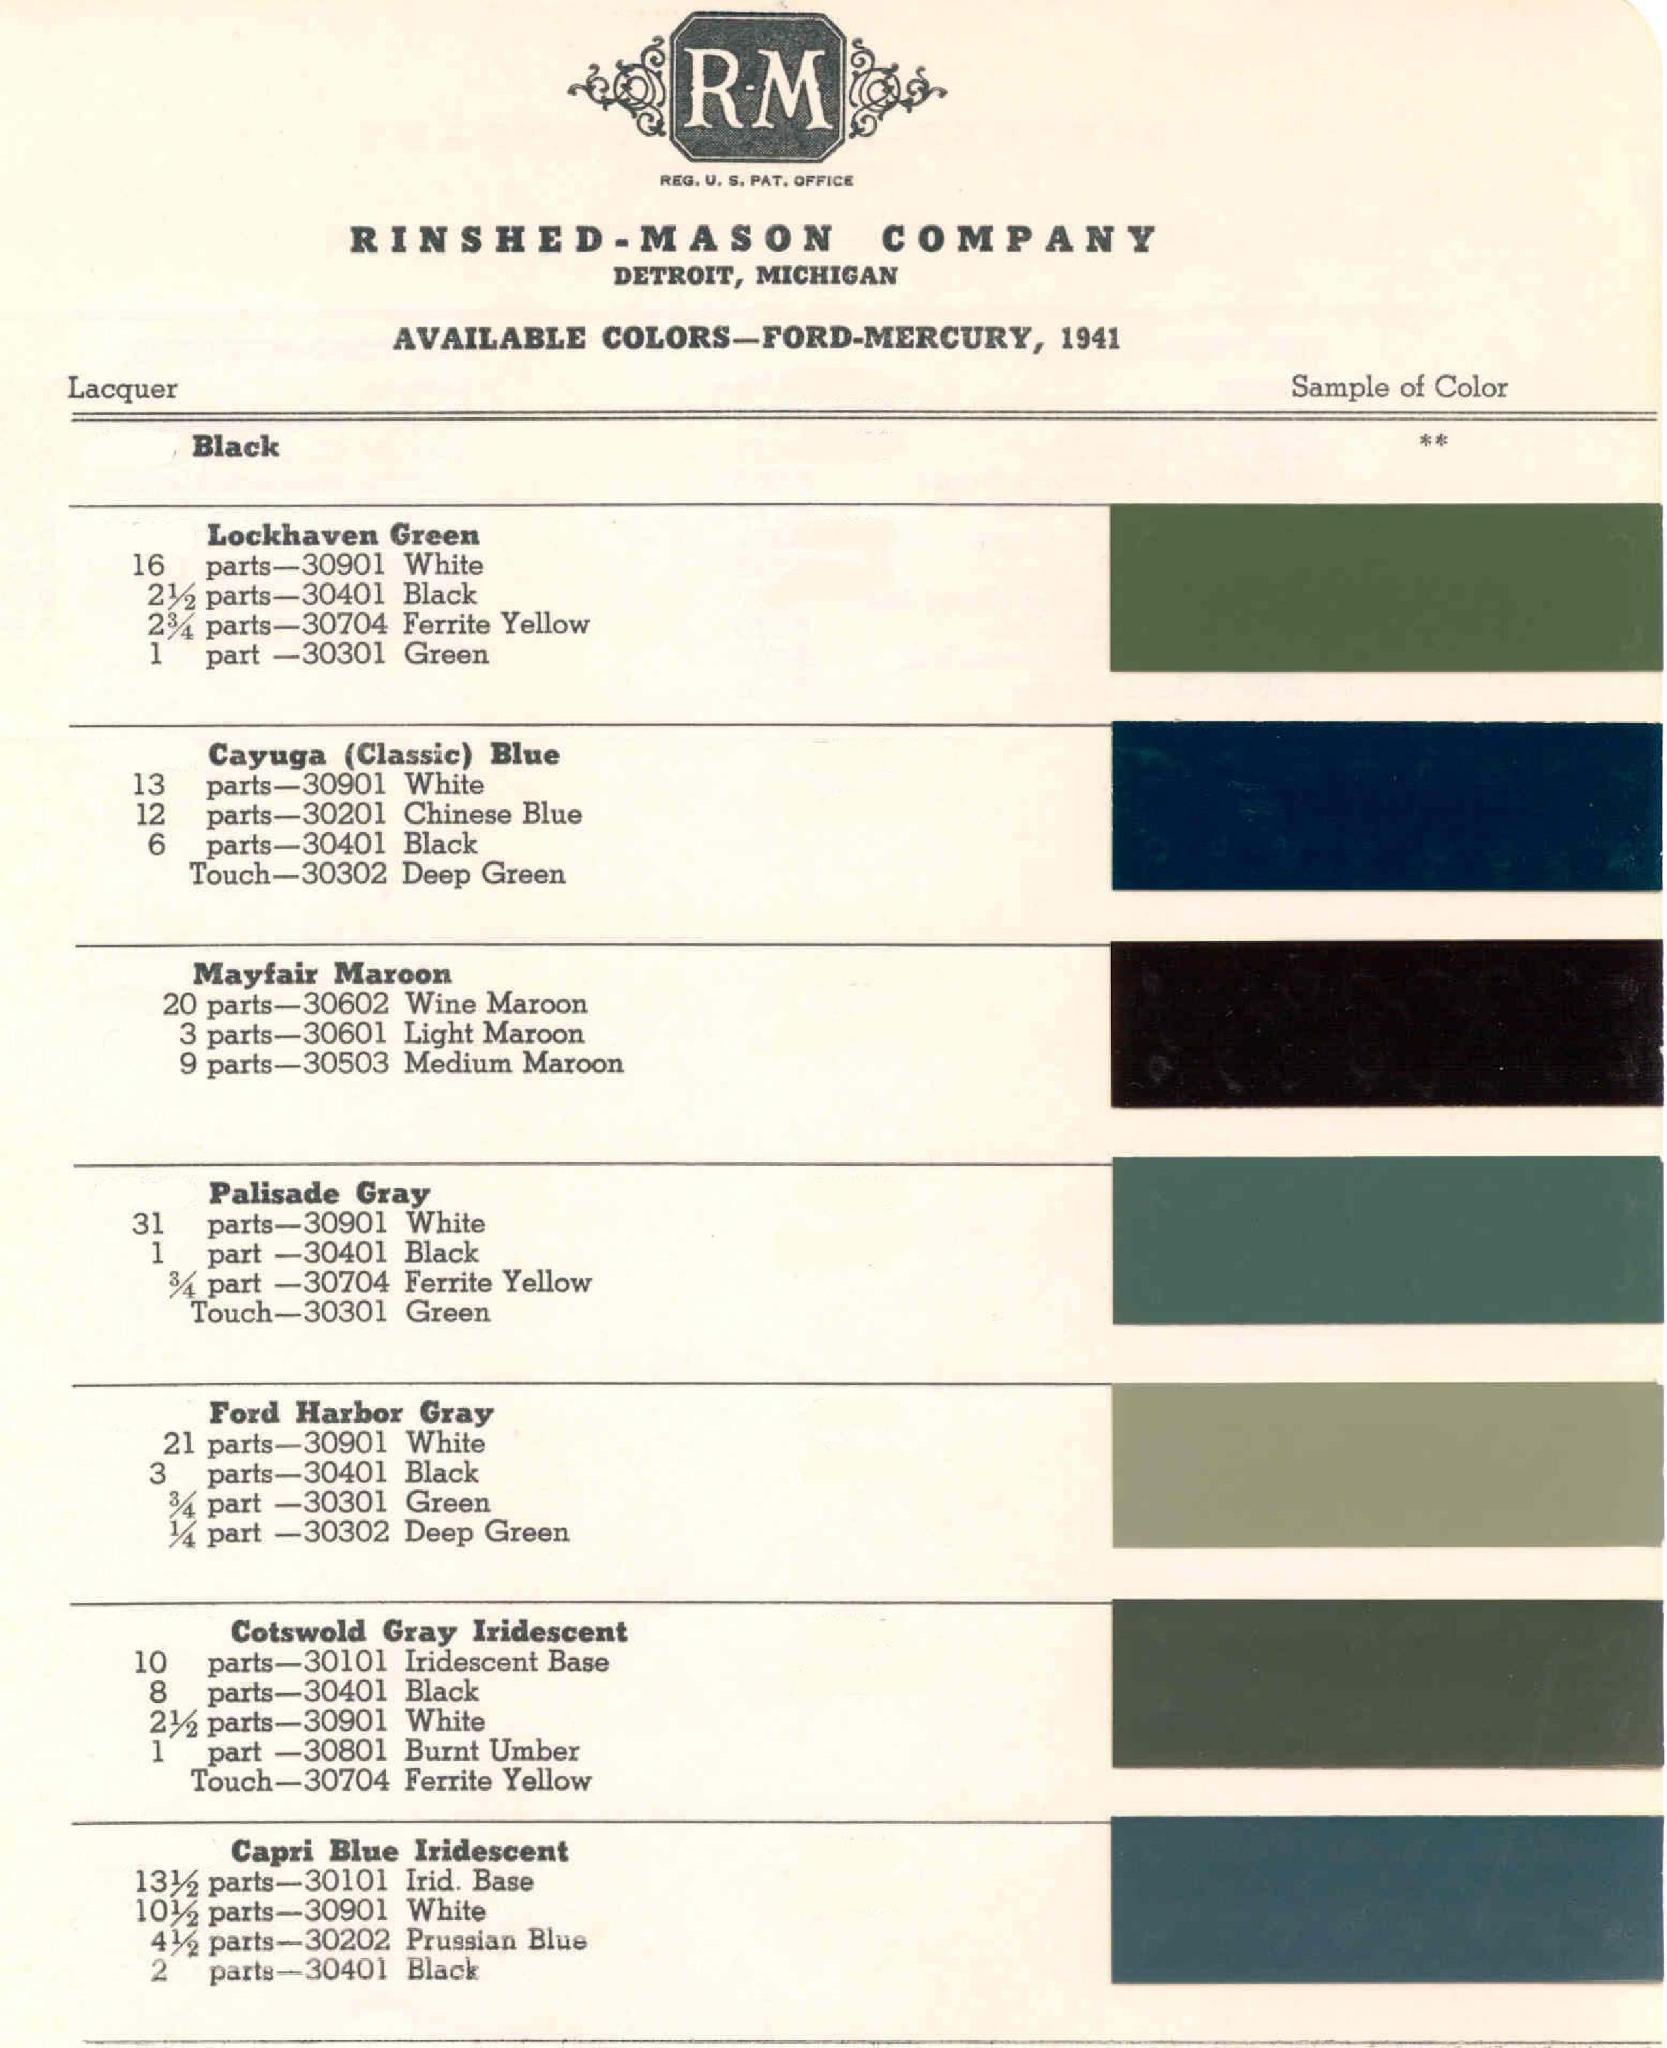 Paint Colors for Mercury Exterior Colors in 1941